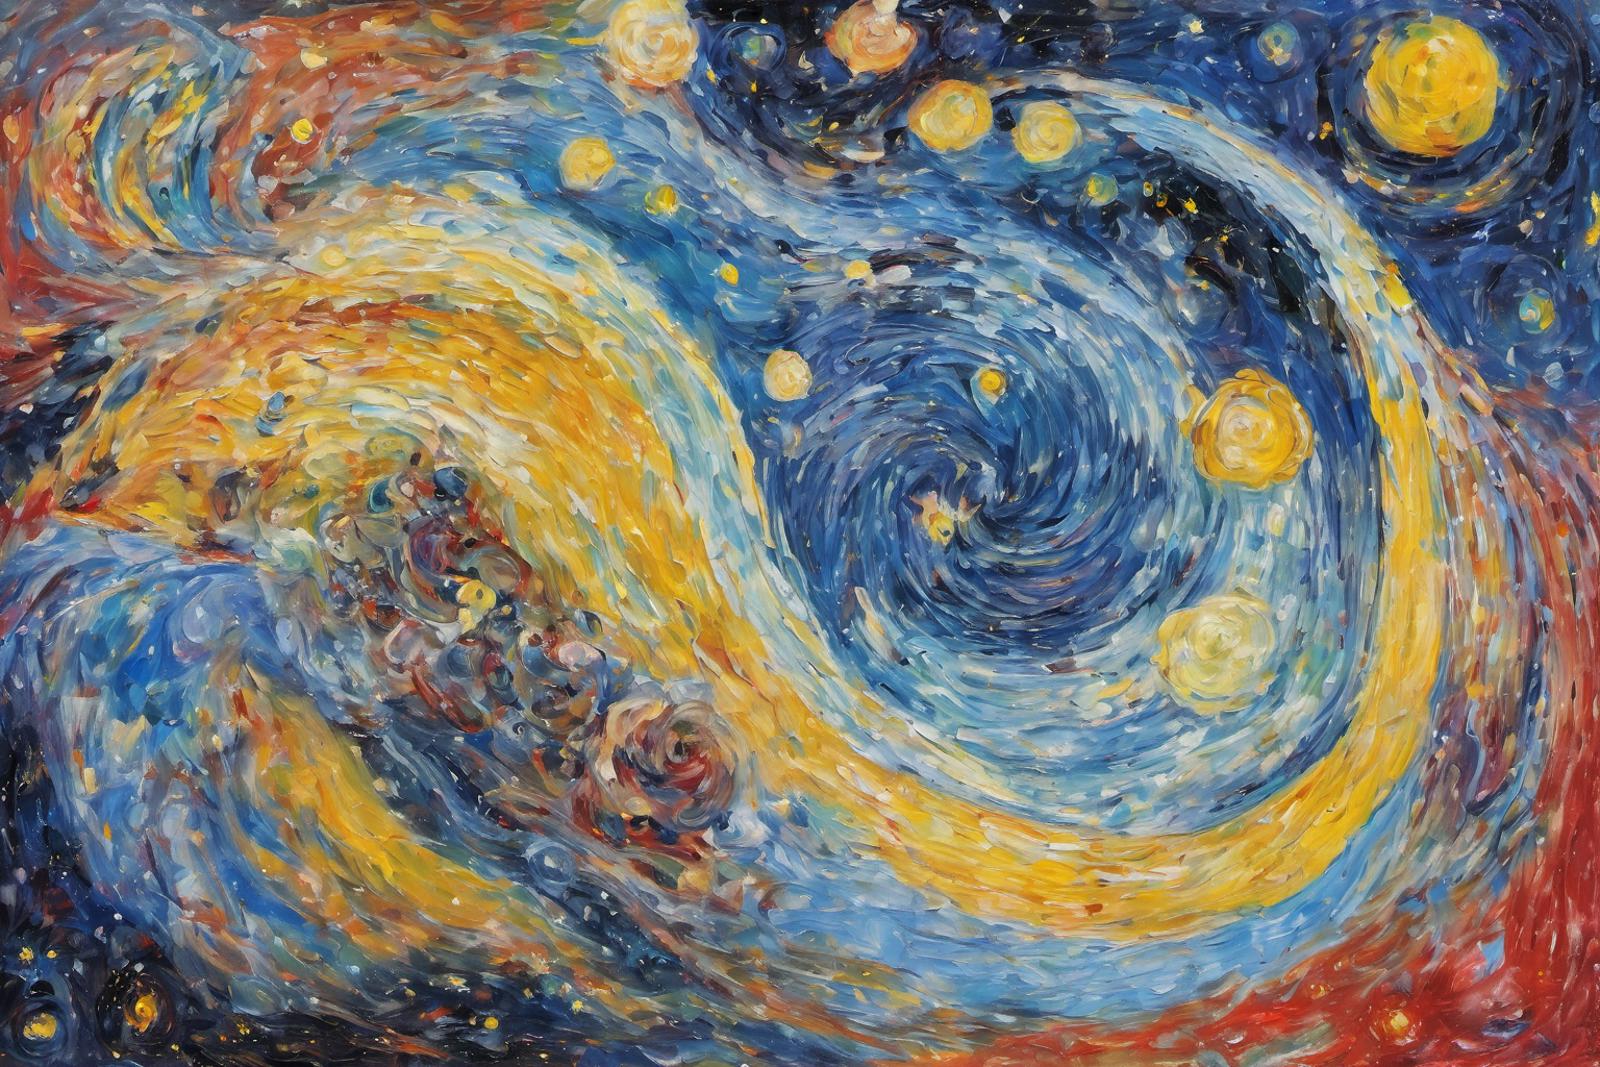 An artistic blue and yellow painting with bright stars and swirls.